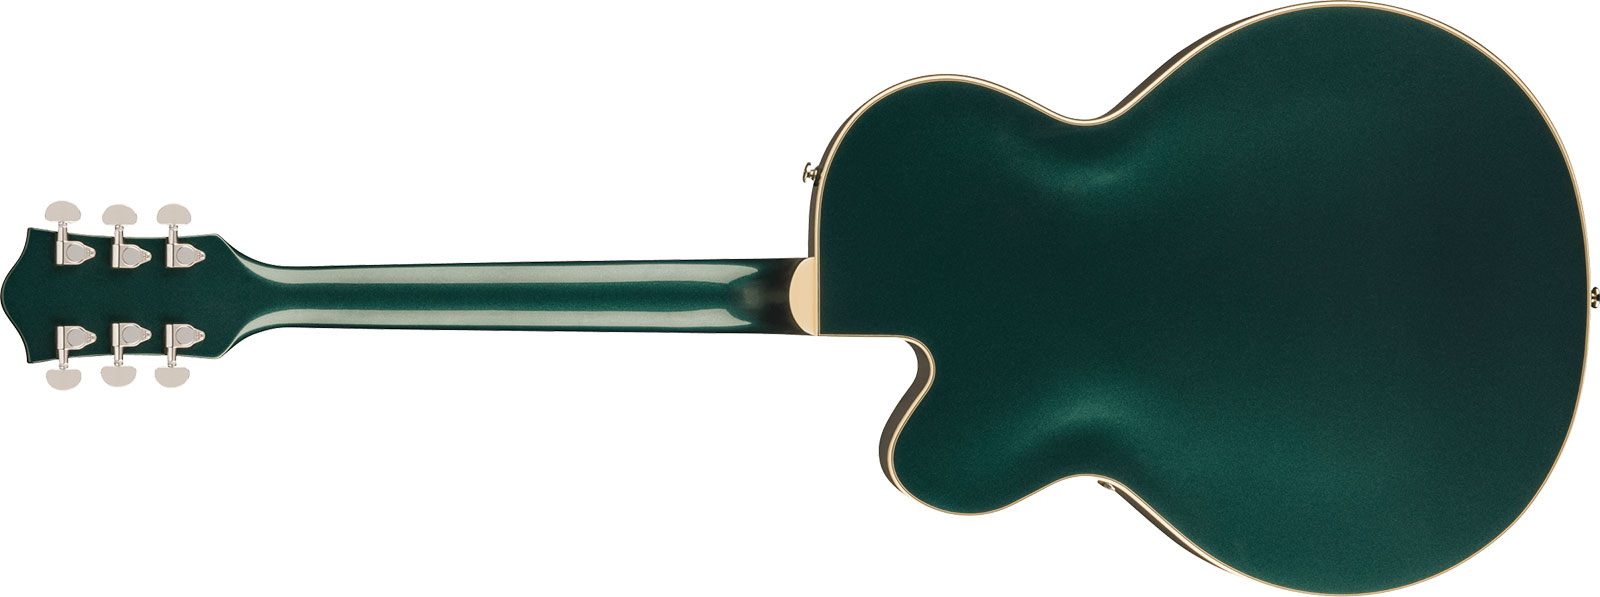 Gretsch G2420 Streamliner Hollow Body With Chromatic Ii 2h Ht Lau - Cadillac Green - Hollow-body electric guitar - Variation 1